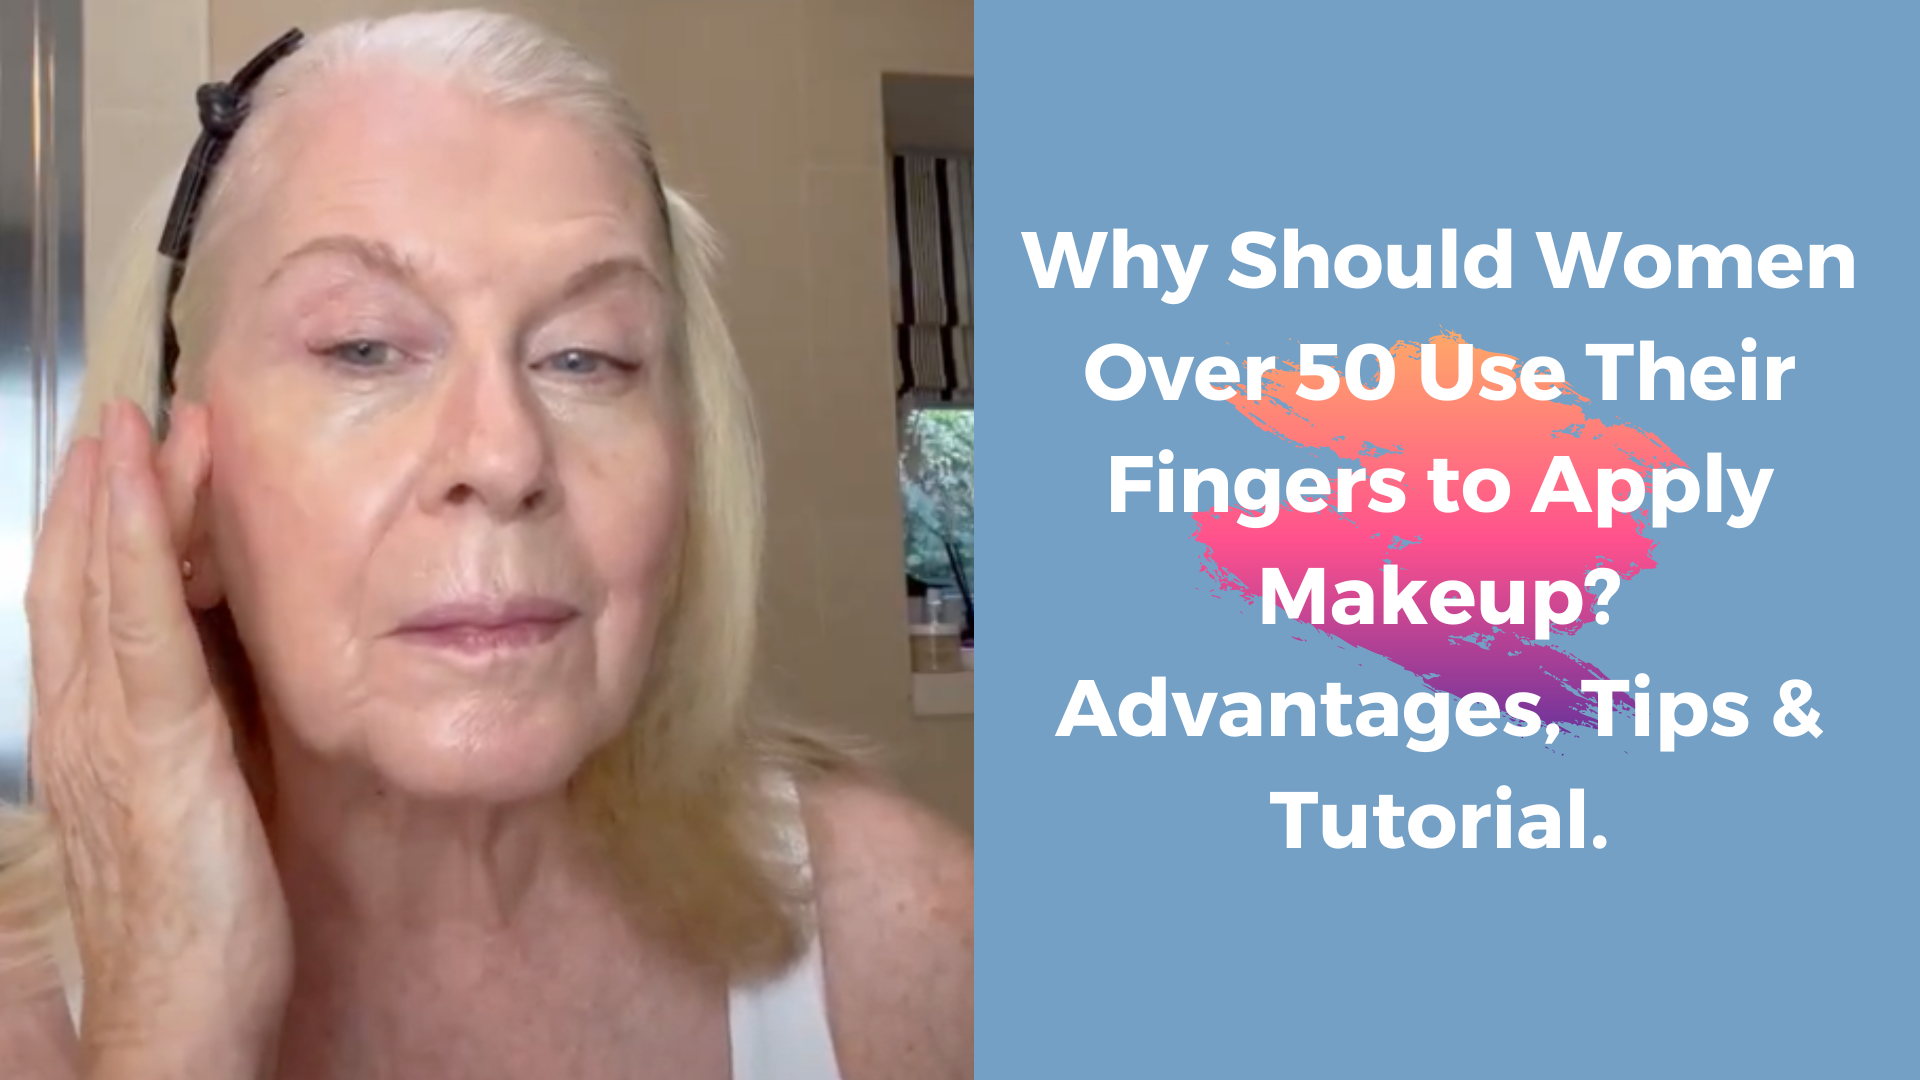 Why Should Women Over 50 Use Their Fingers